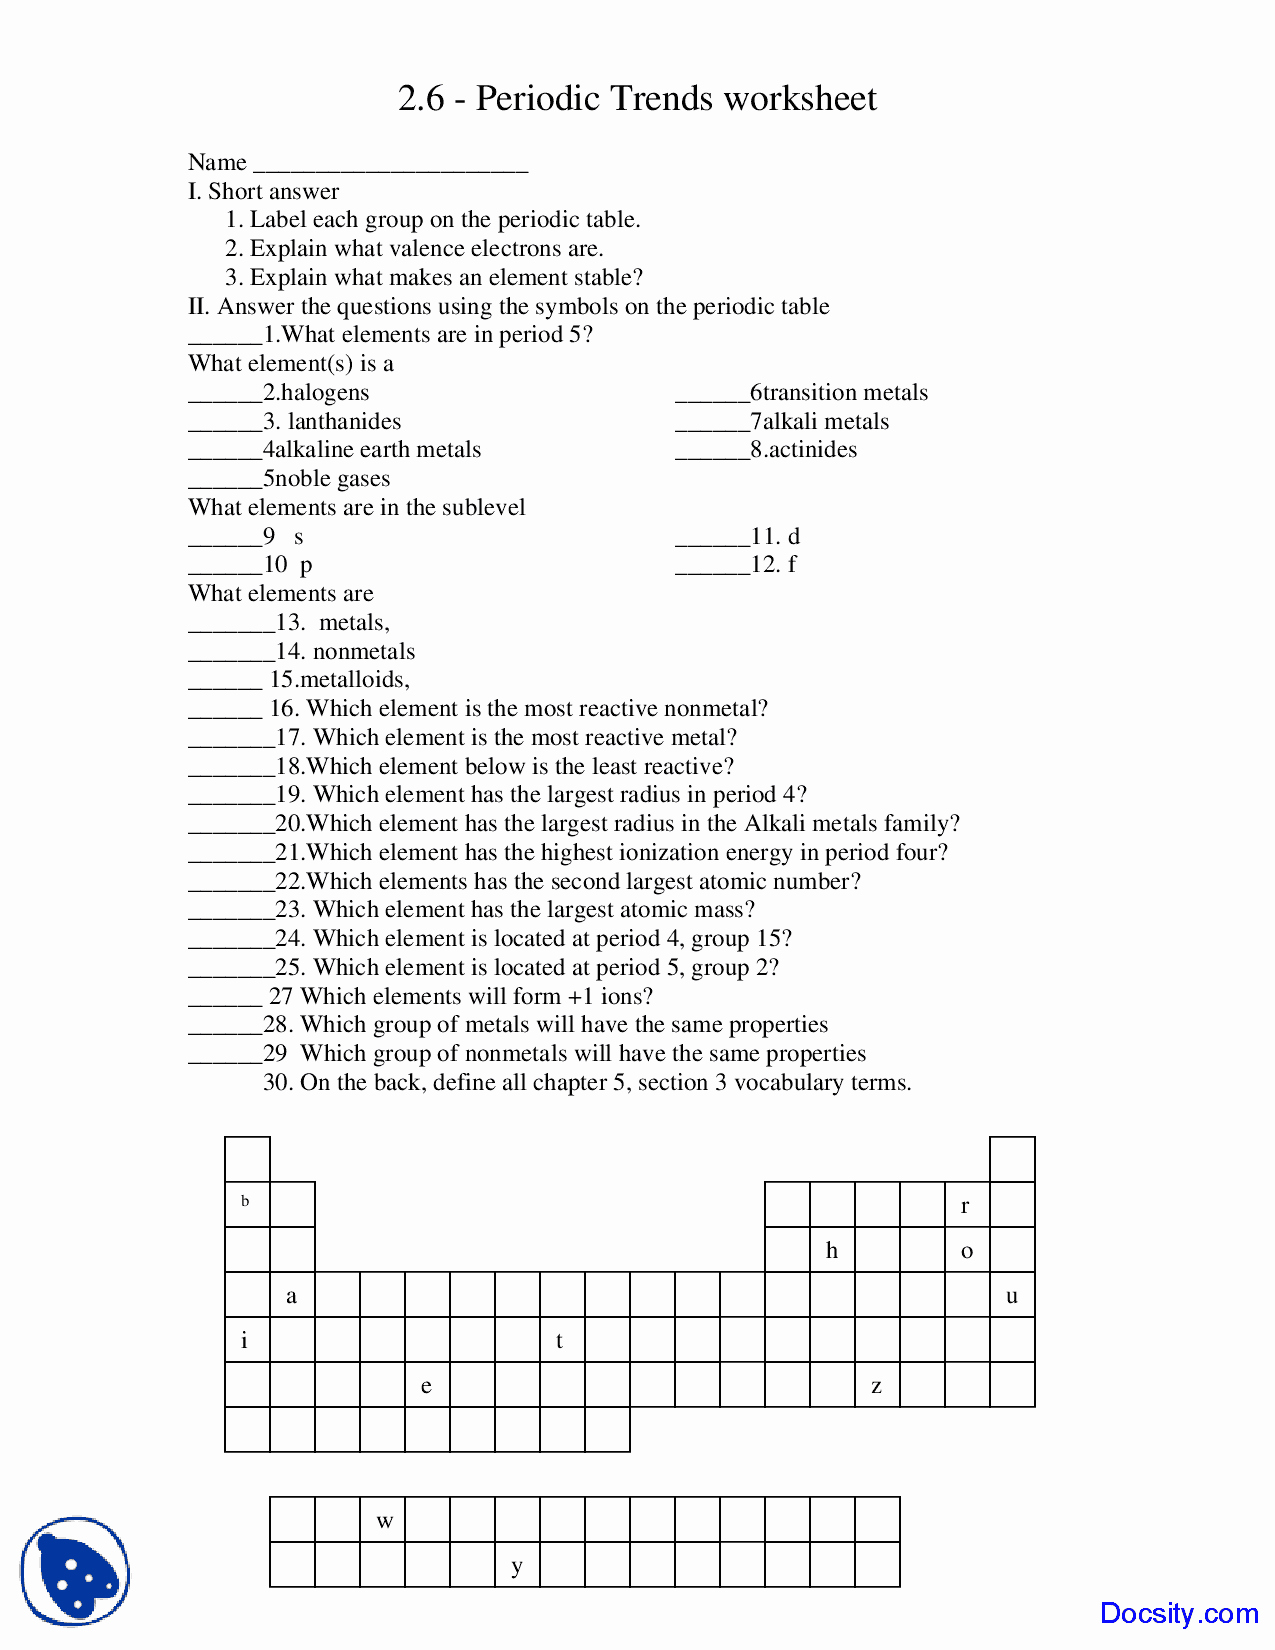 Periodic Trends Worksheet Answers Fresh Periodic Trends Worksheet General Chemistry Quiz Docsity